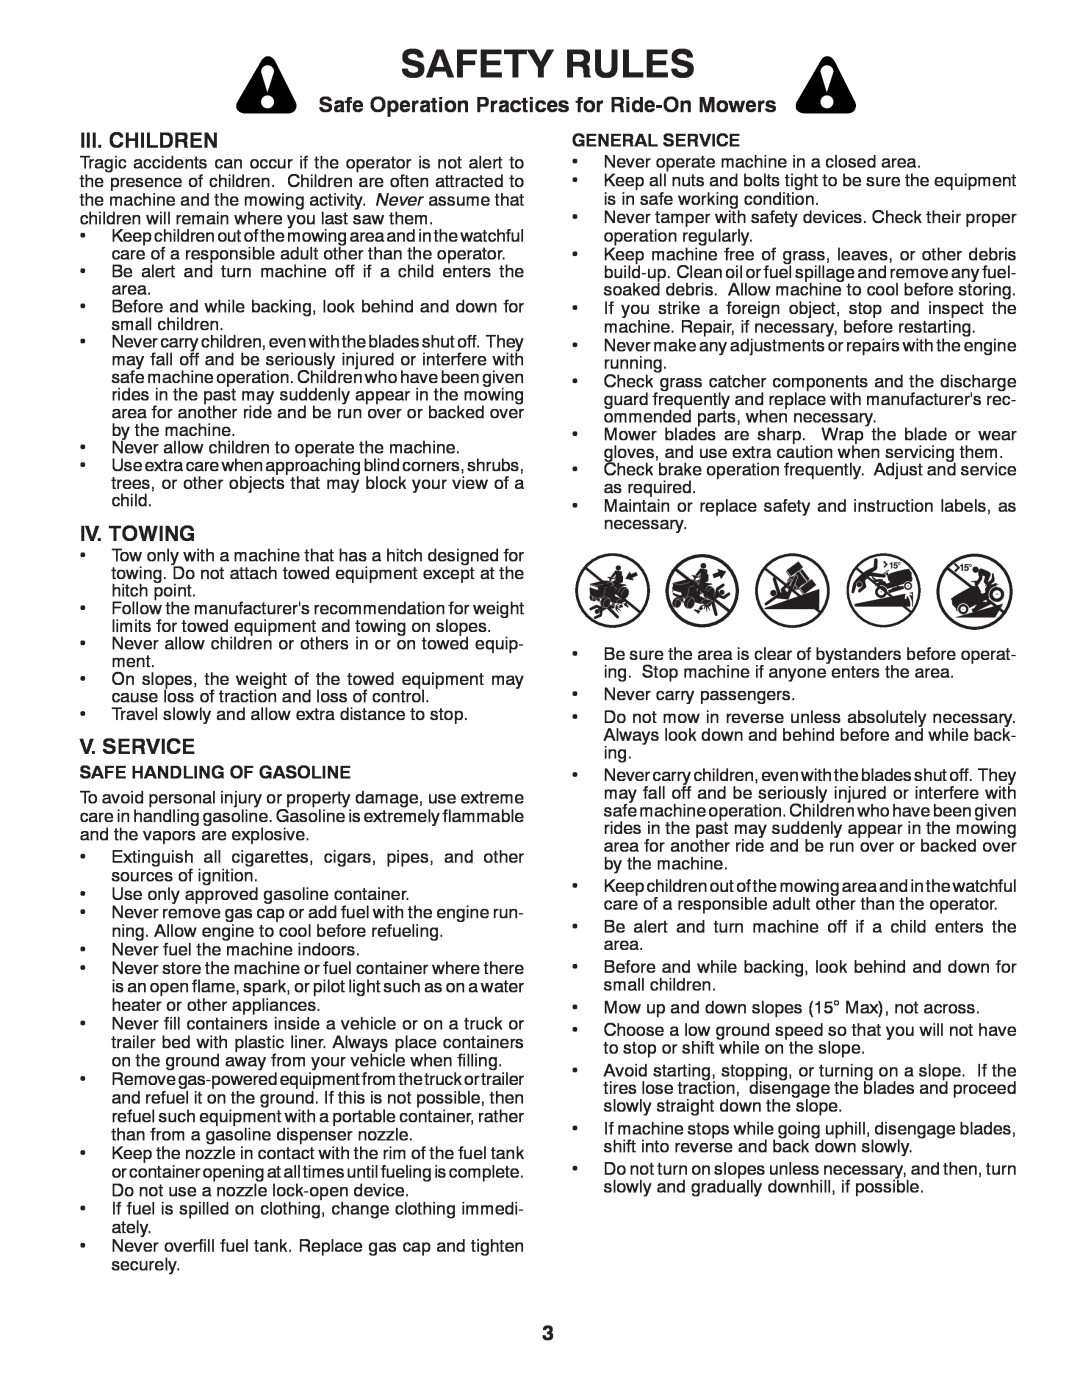 Poulan XT195H46YT manual Iii. Children, Iv. Towing, V. Service, Safety Rules, Safe Operation Practices for Ride-On Mowers 